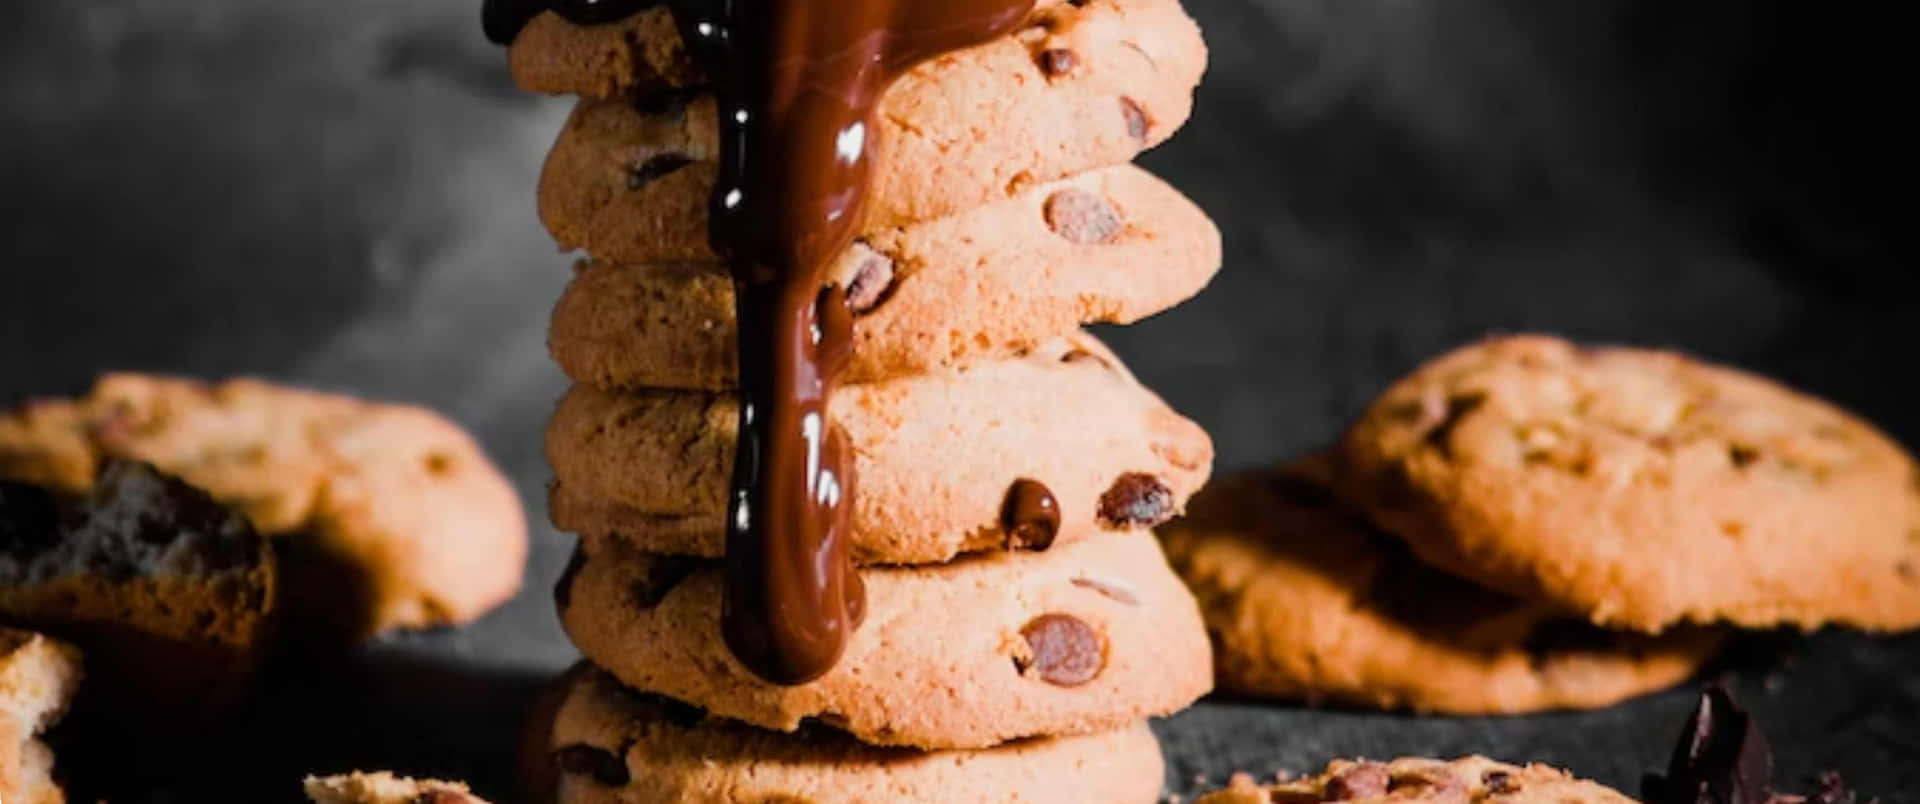 Close-up Photography 3440x1440p Cookies Background For Desktop